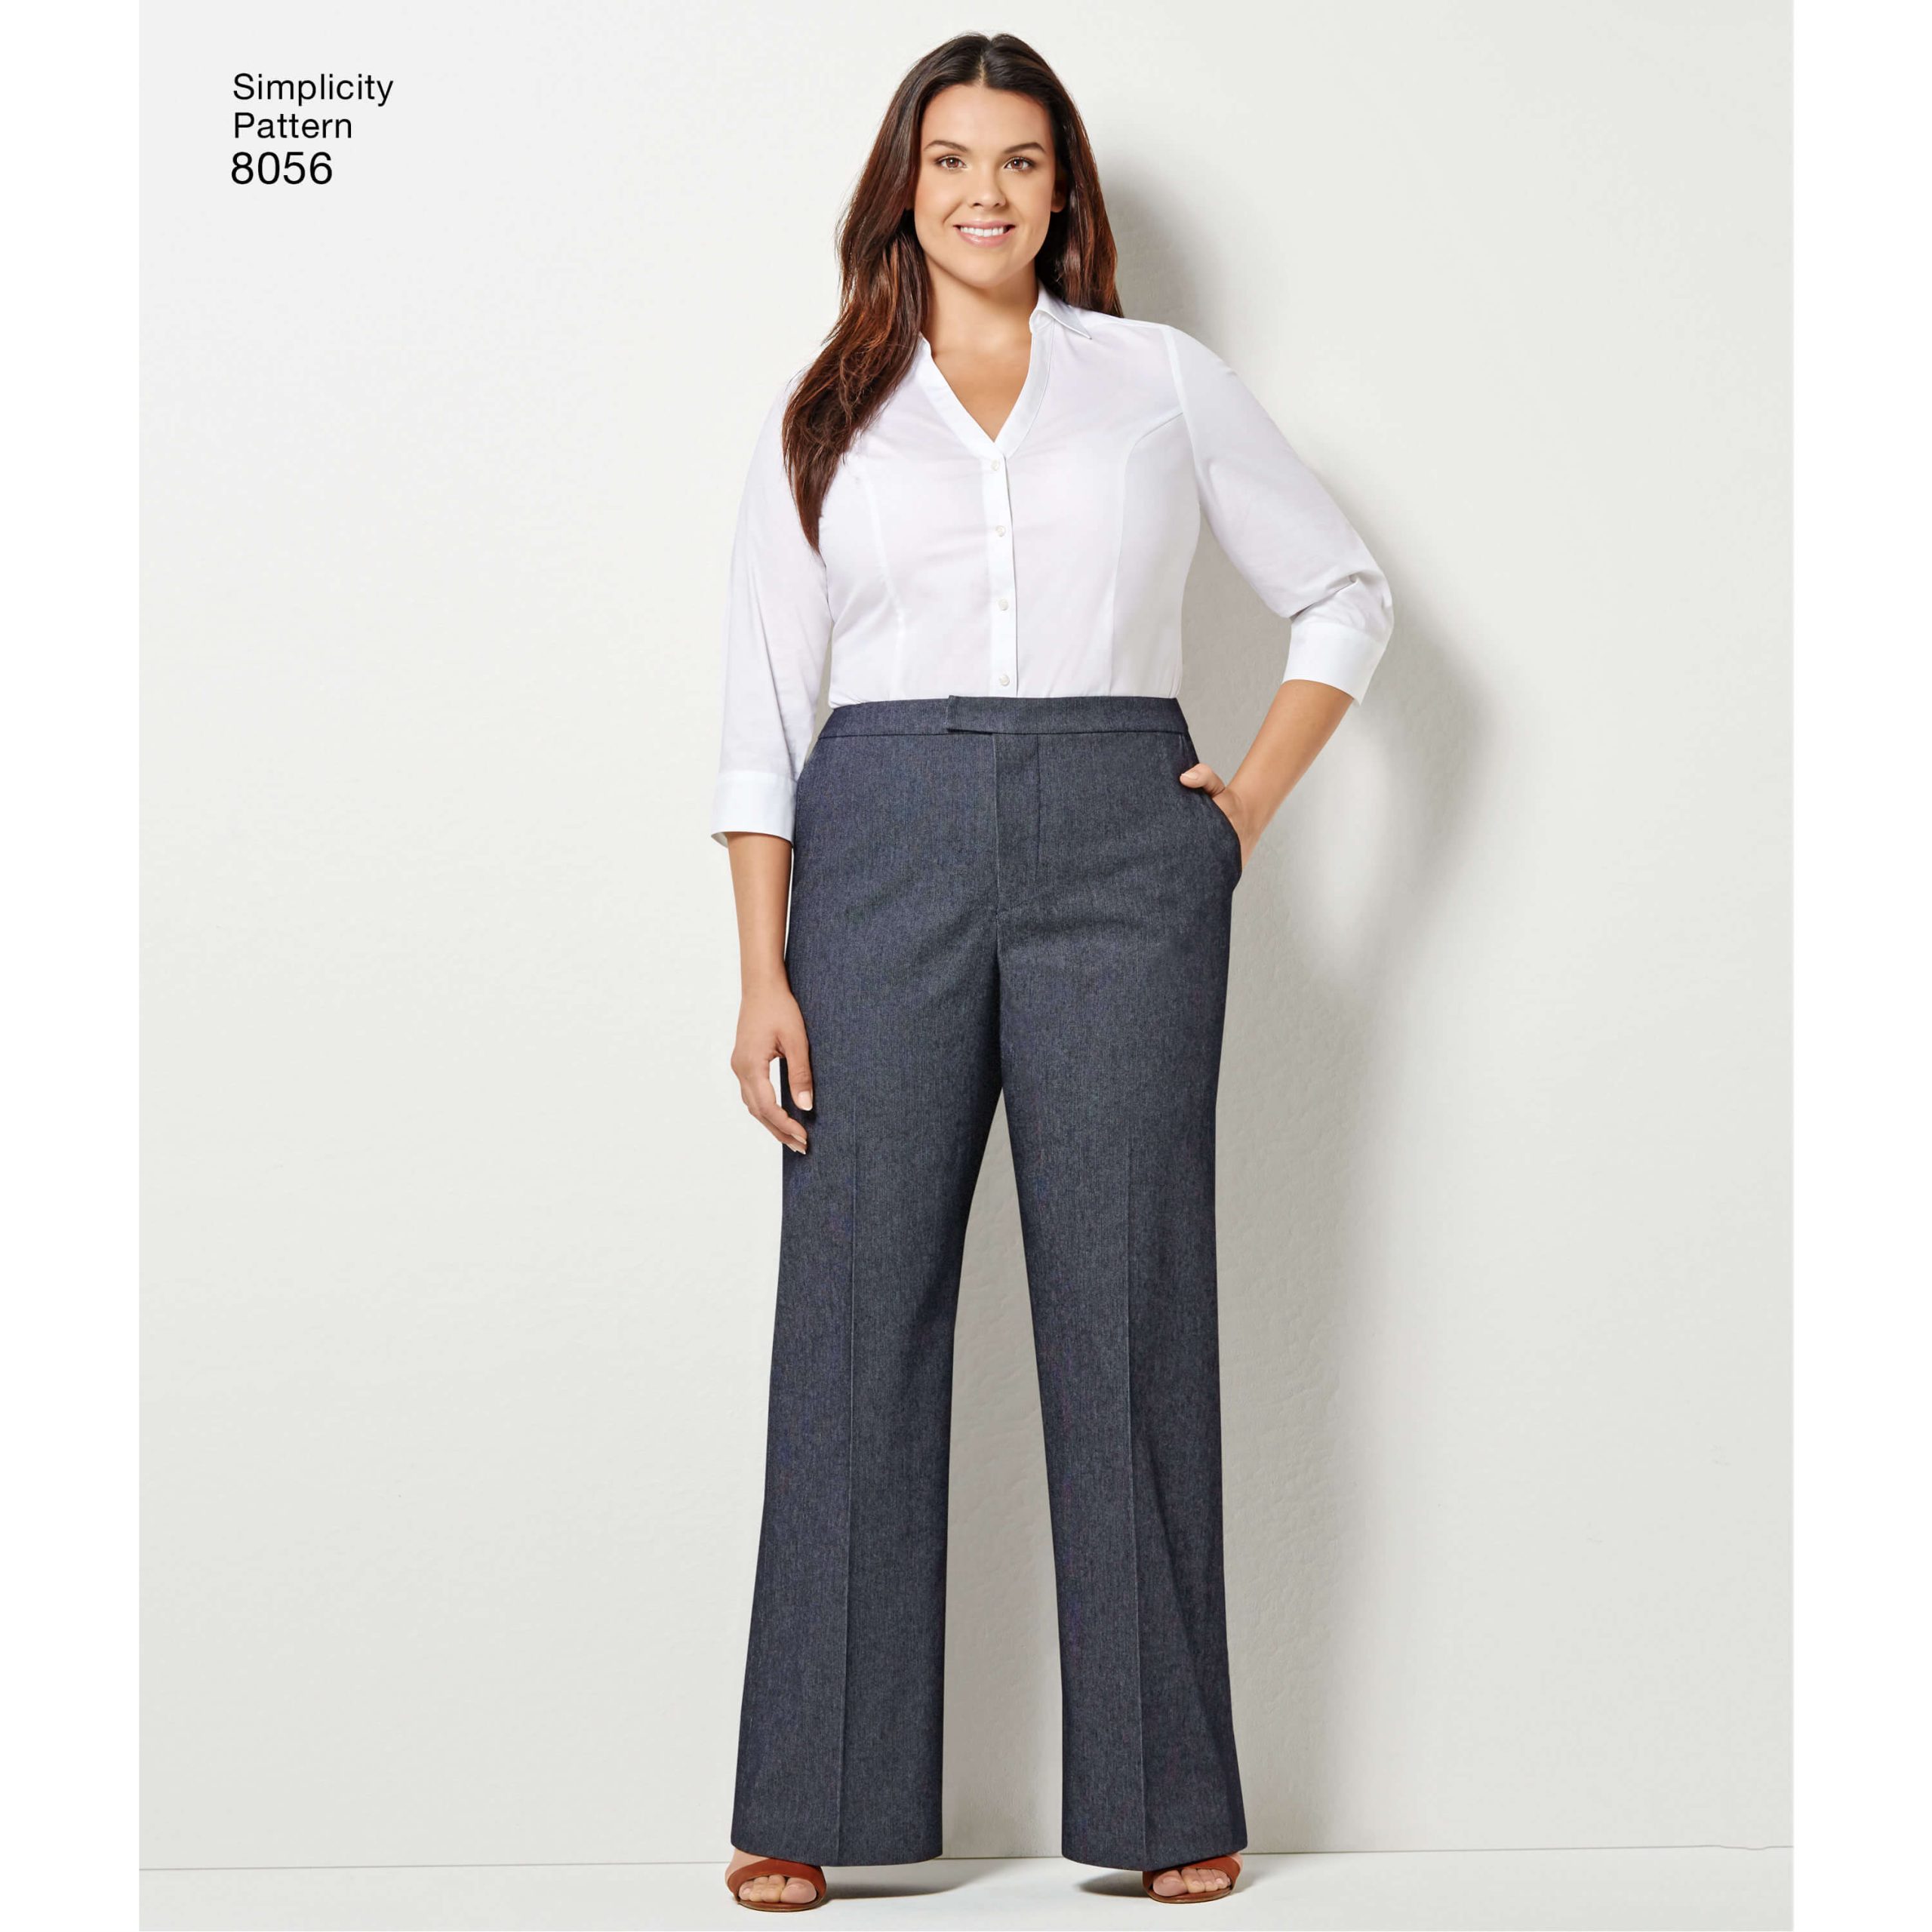 Simplicity Sewing Pattern 8056 Amazing Fit Miss and Plus Size Flared Trousers or Shorts